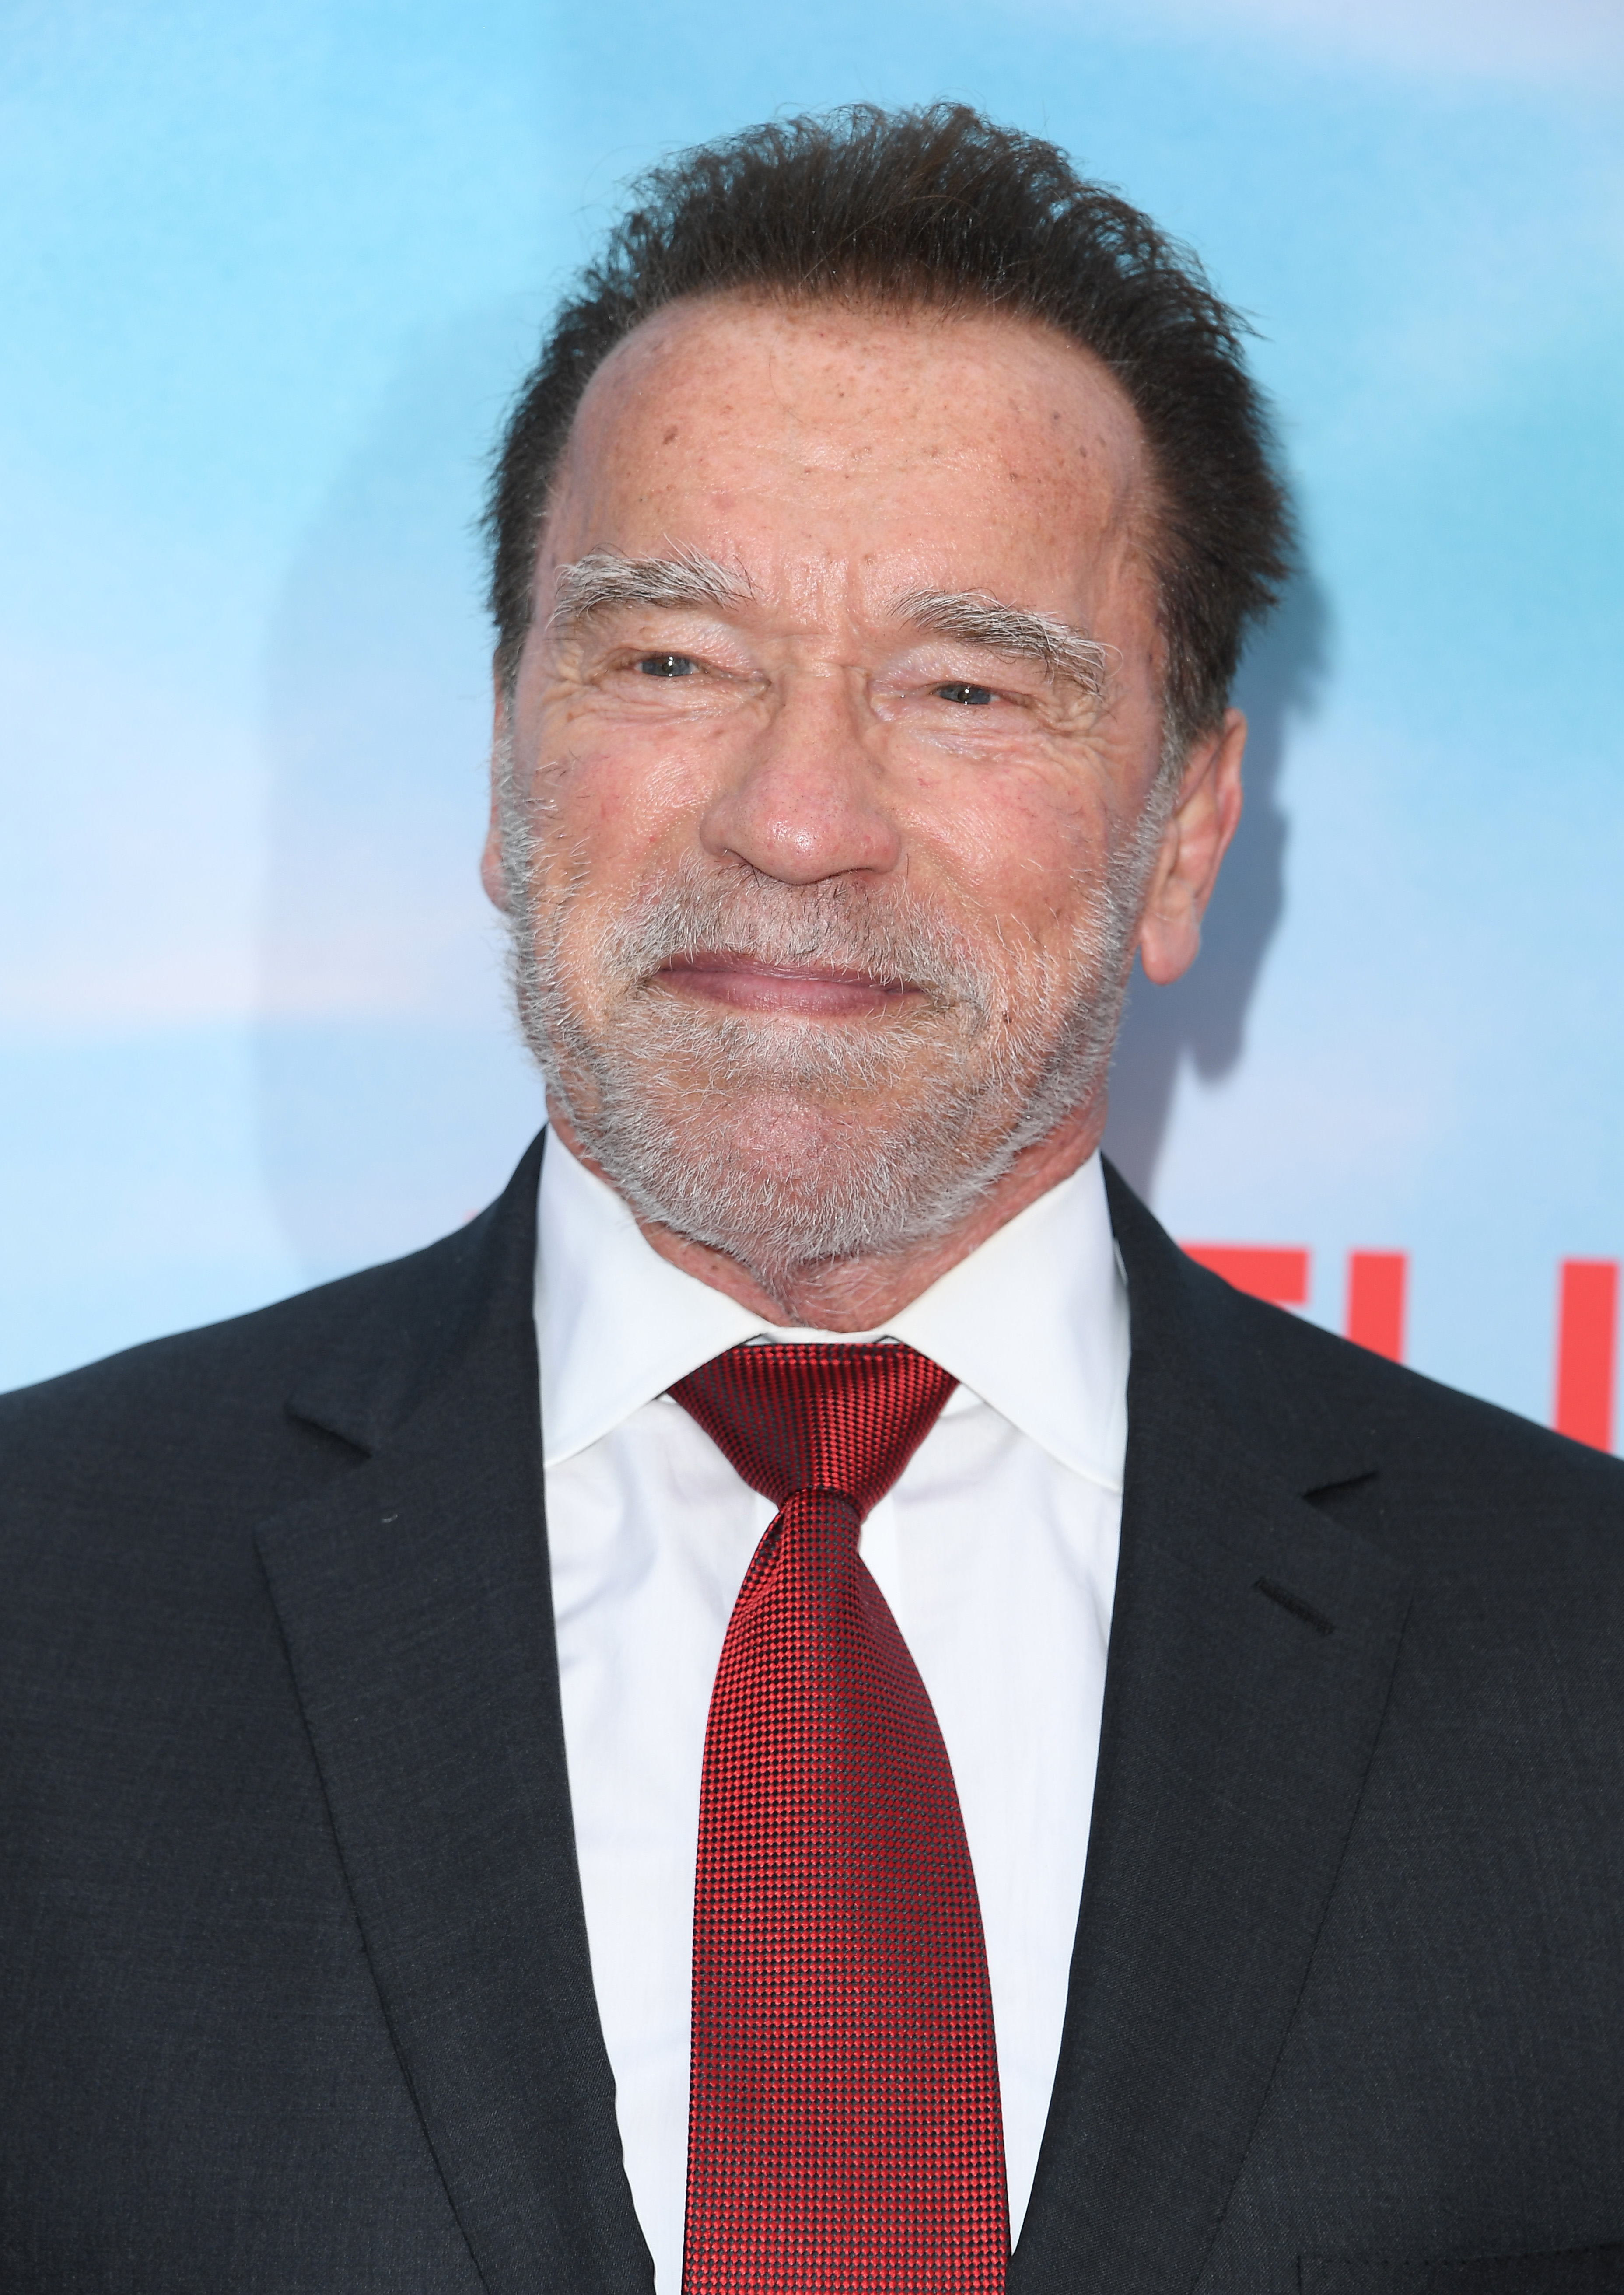 Arnold Schwarzenegger at the premiere of Netflix's "FUBAR" in Los Angeles, California on May 22, 2023 | Source: Getty Images